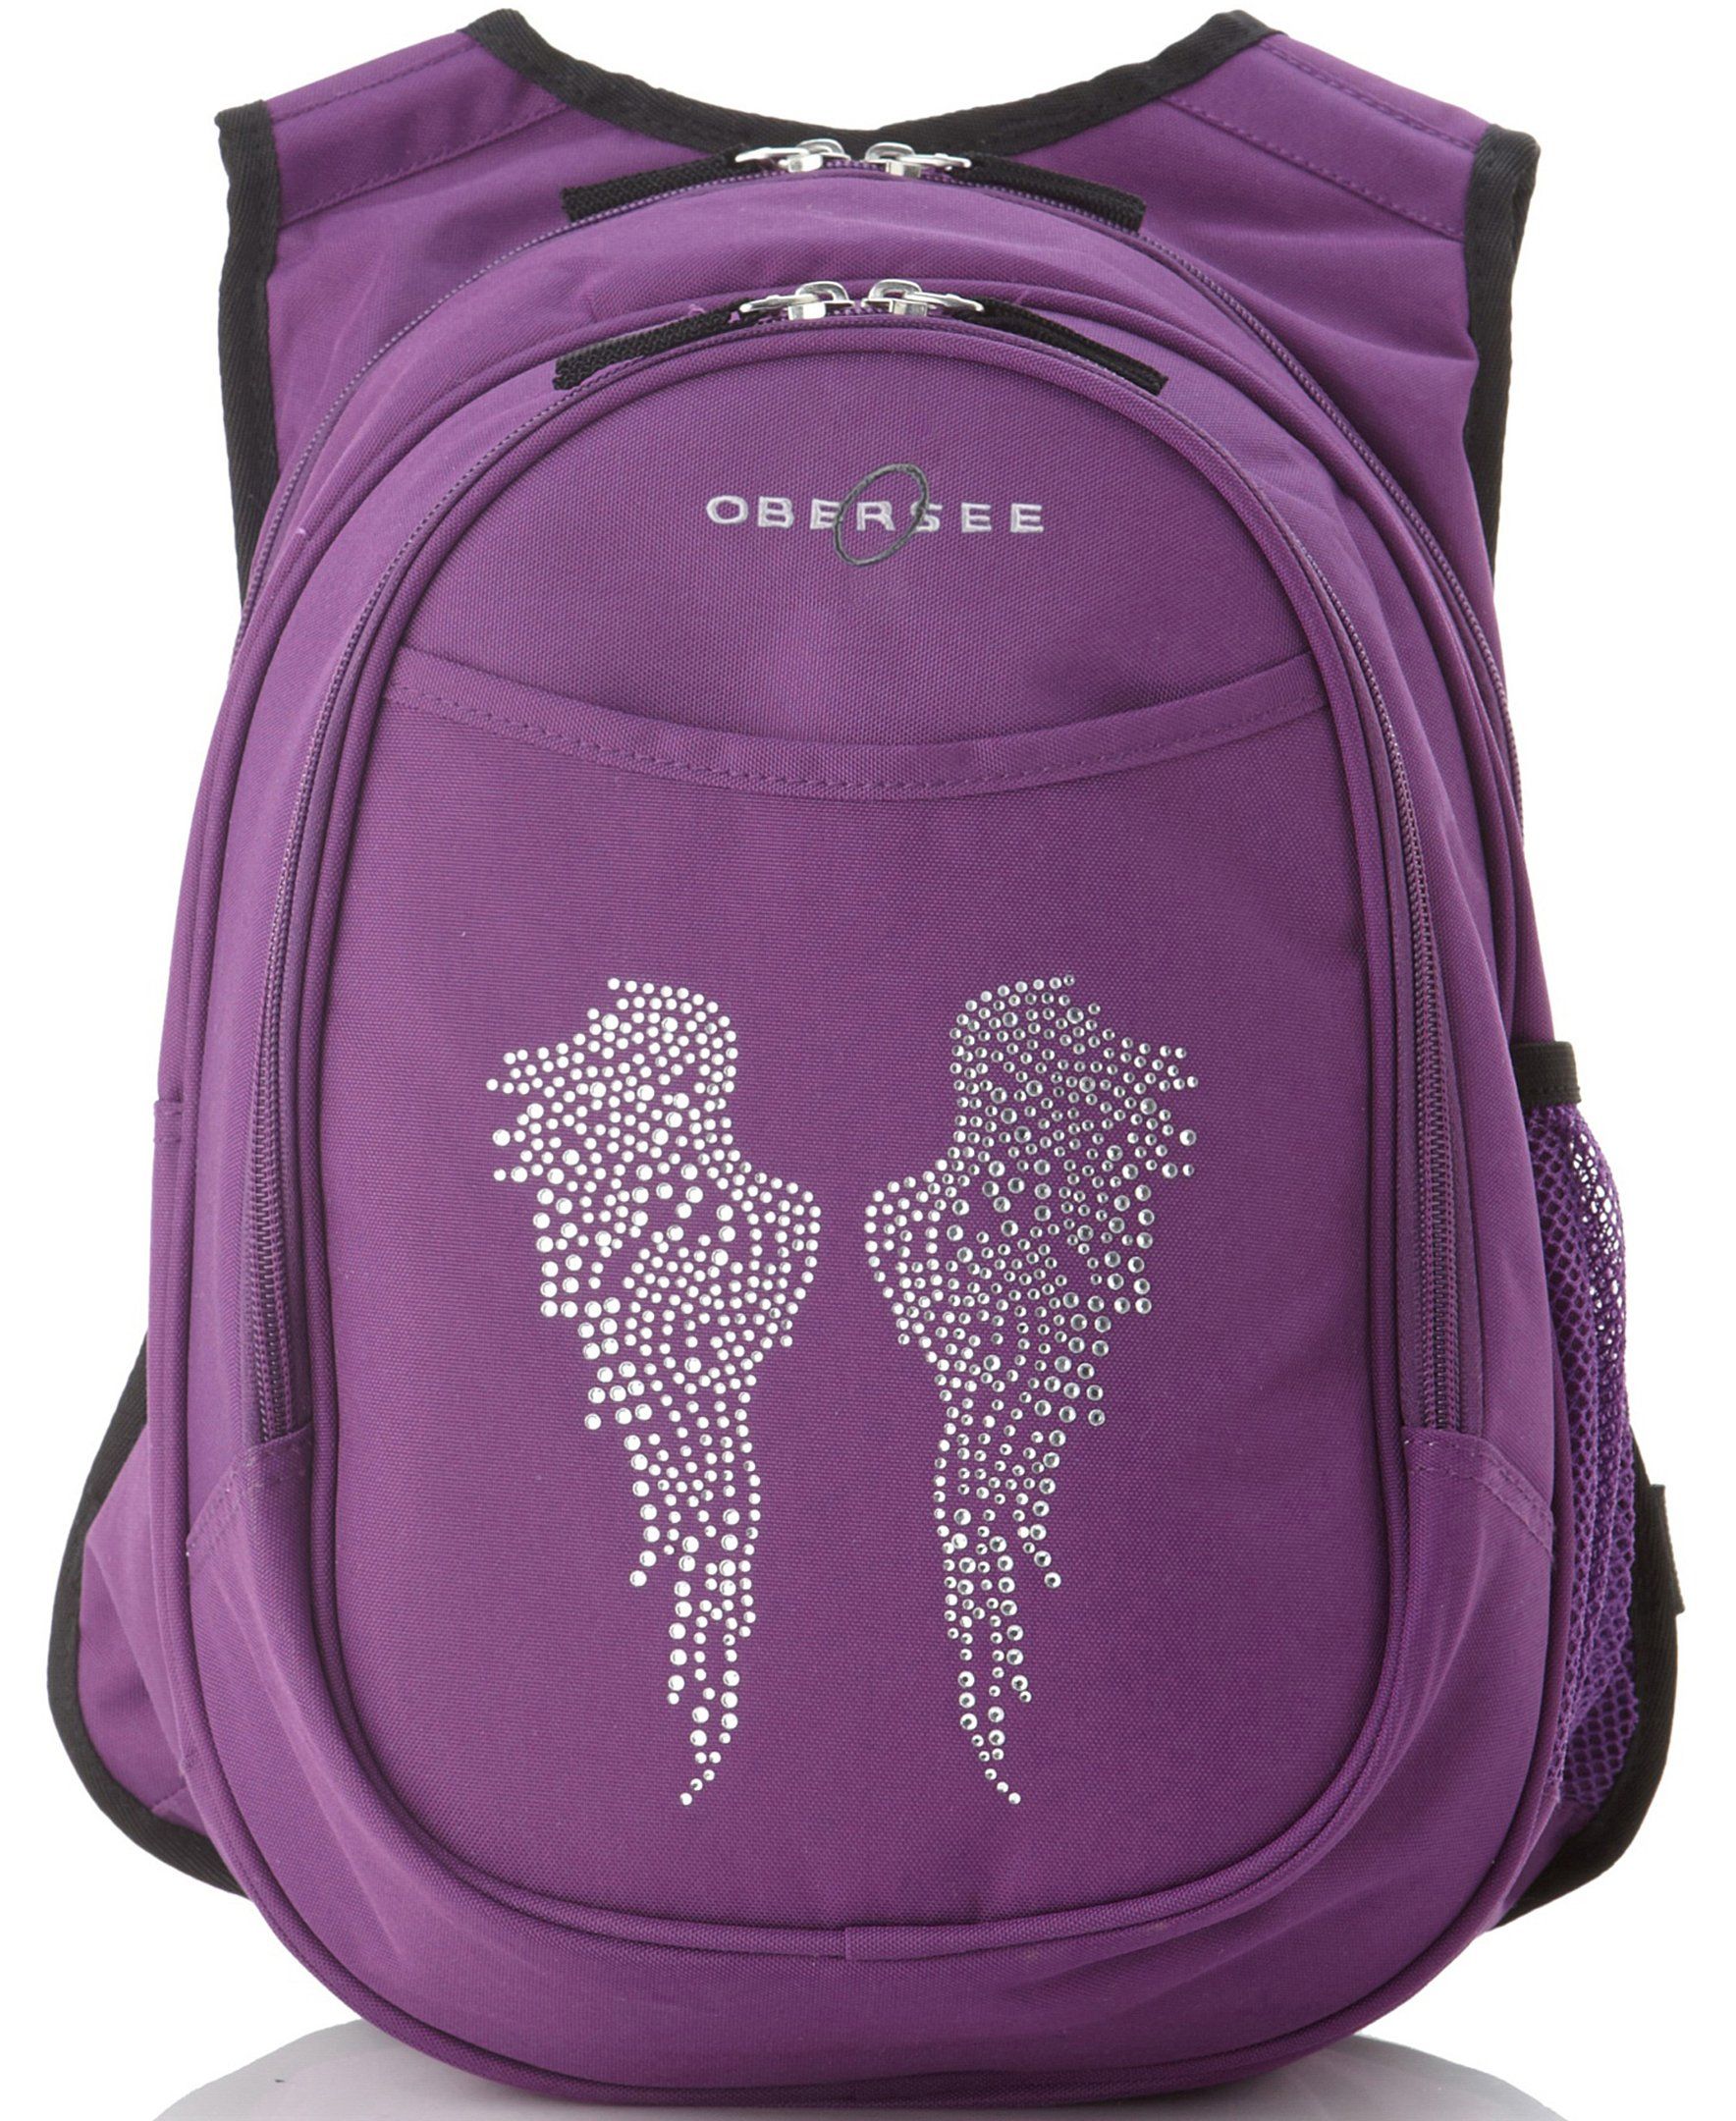 O3KCBP001 Obersee Mini Preschool All-in-One Backpack for Toddlers and Kids with integrated Insulated Cooler | Rhinestone Angel Wings - image 1 of 6